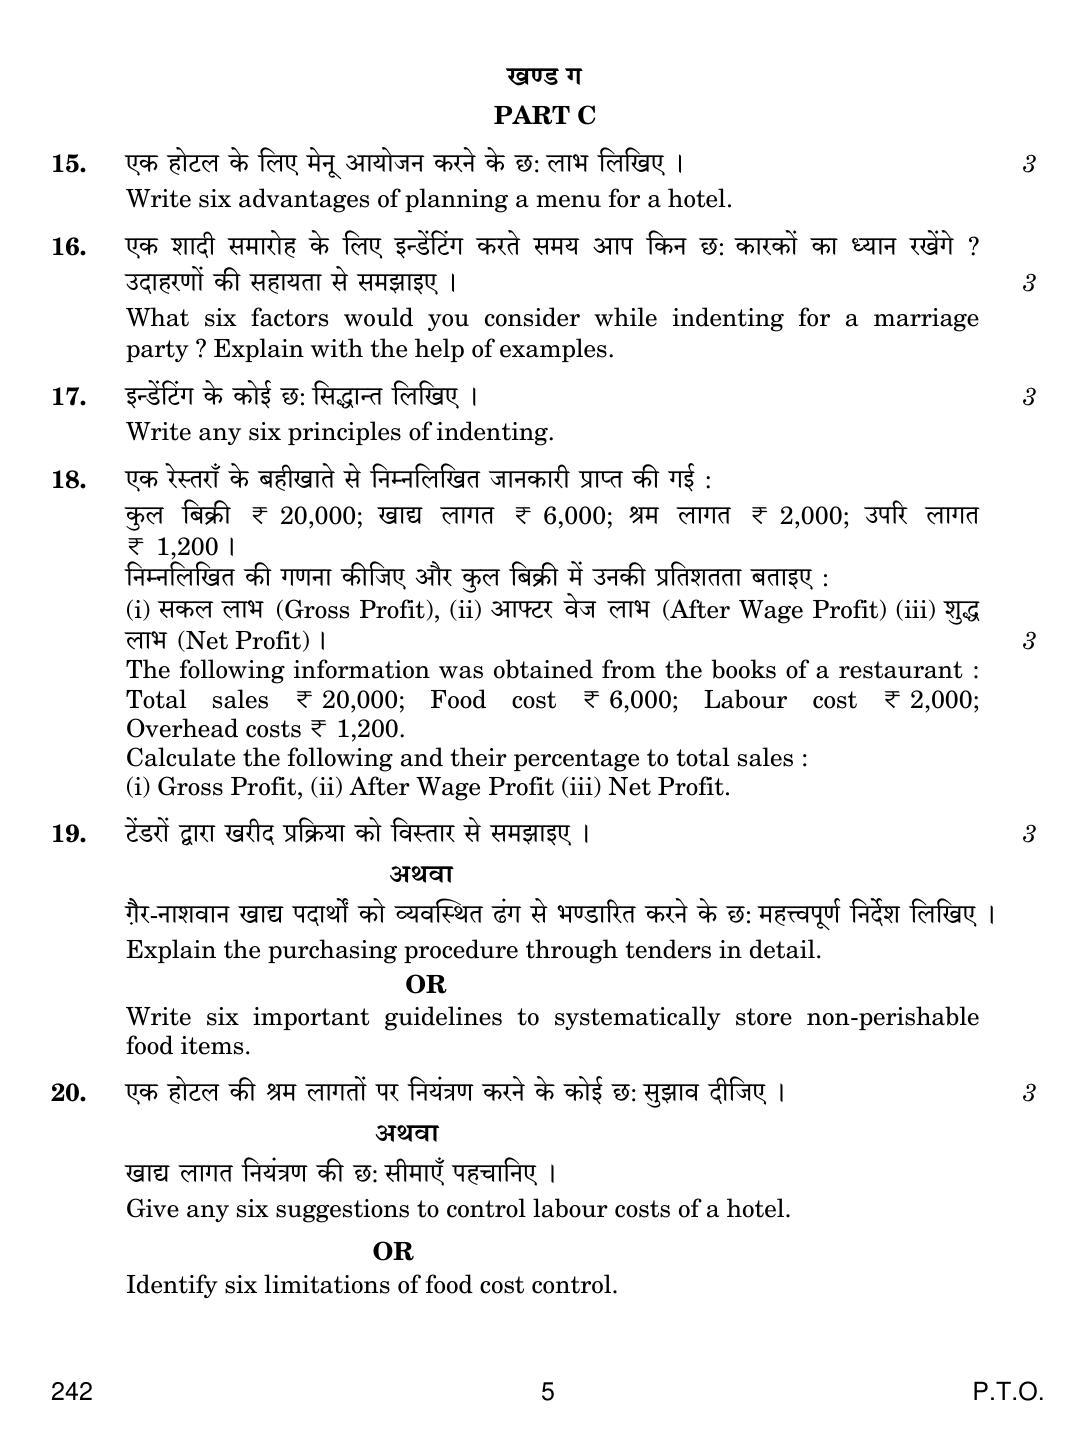 CBSE Class 12 242 FOOD PRODUCTION IV 2018 Question Paper - Page 5